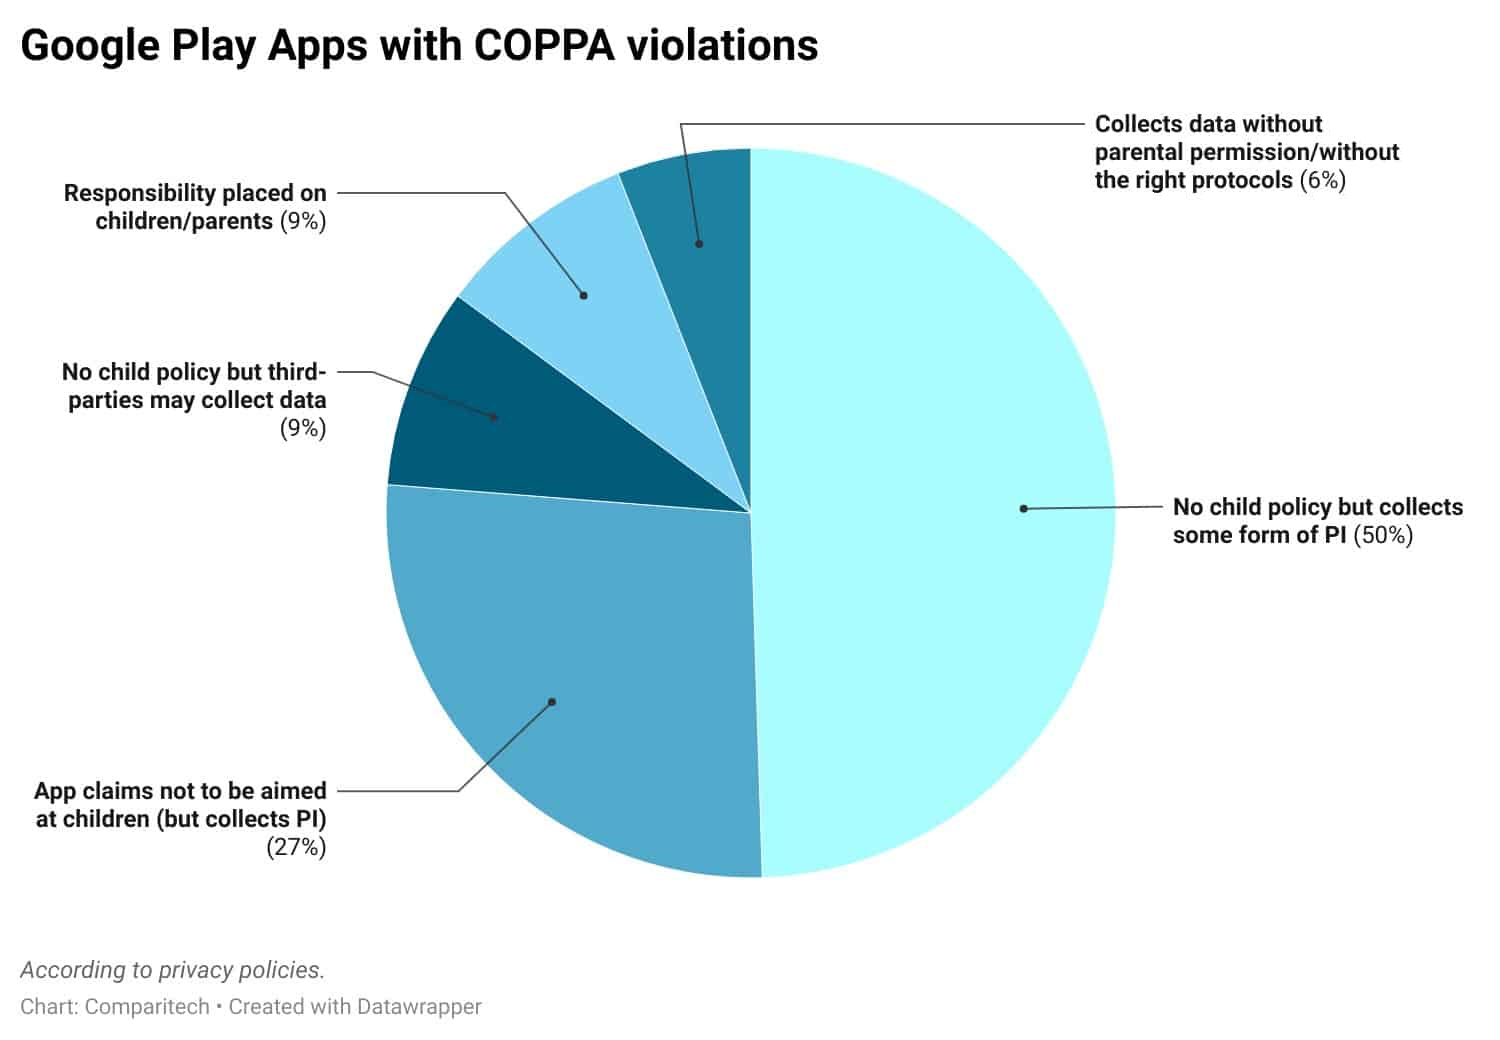 Around 20% of the top 500 apps for children on the Google Play Store were found to violate the privacy policies.